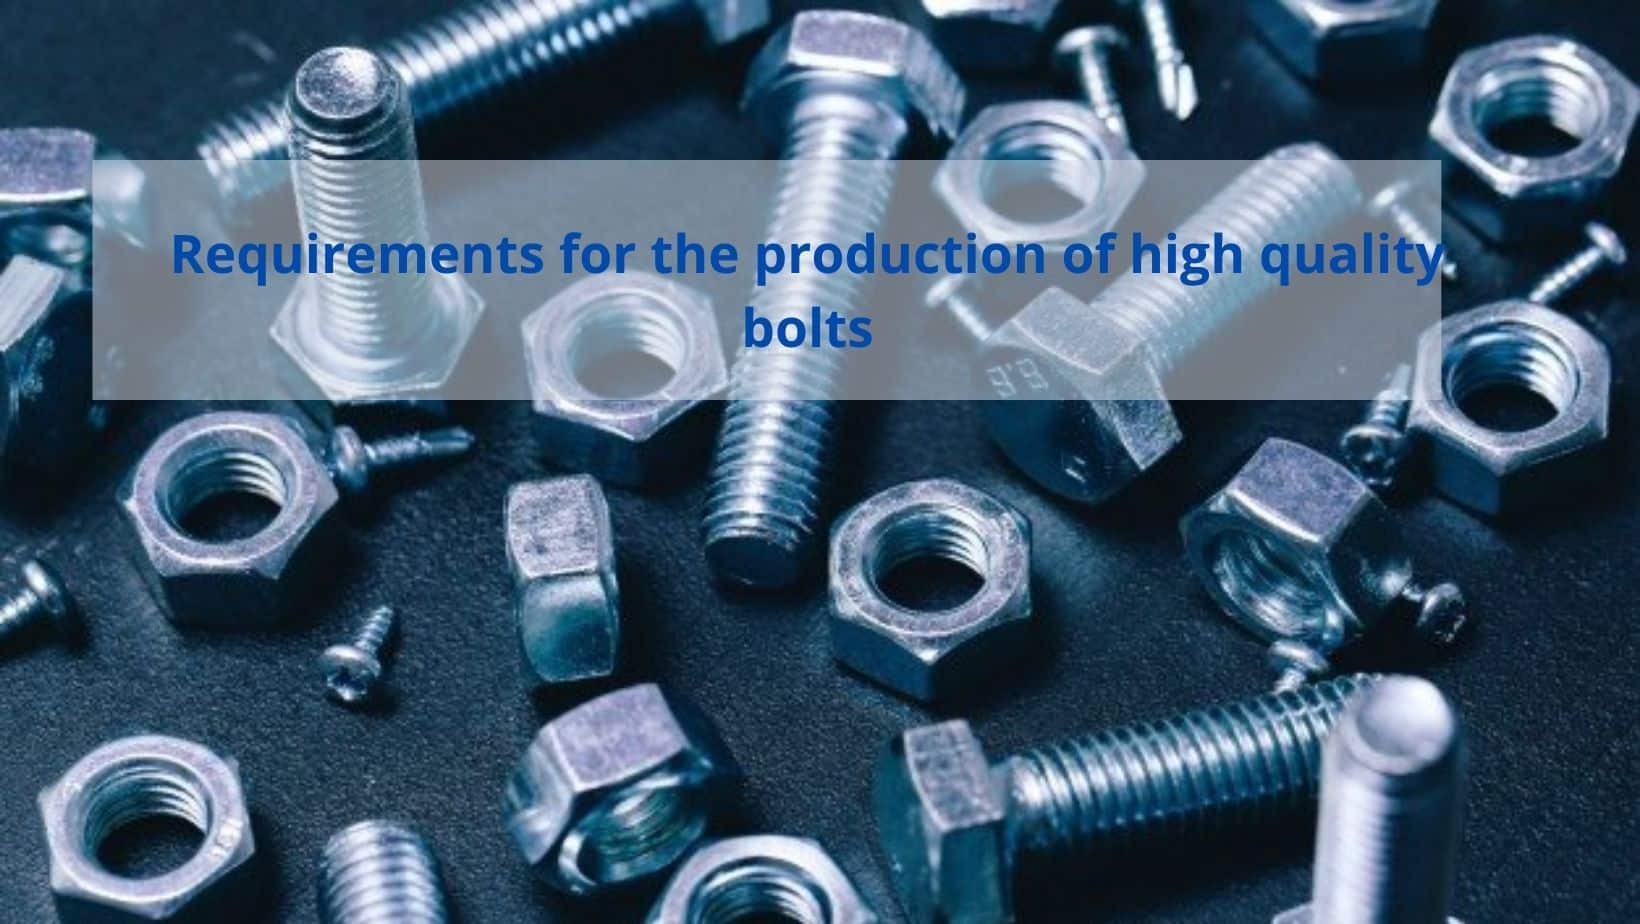 Requirements for the production of high quality bolts